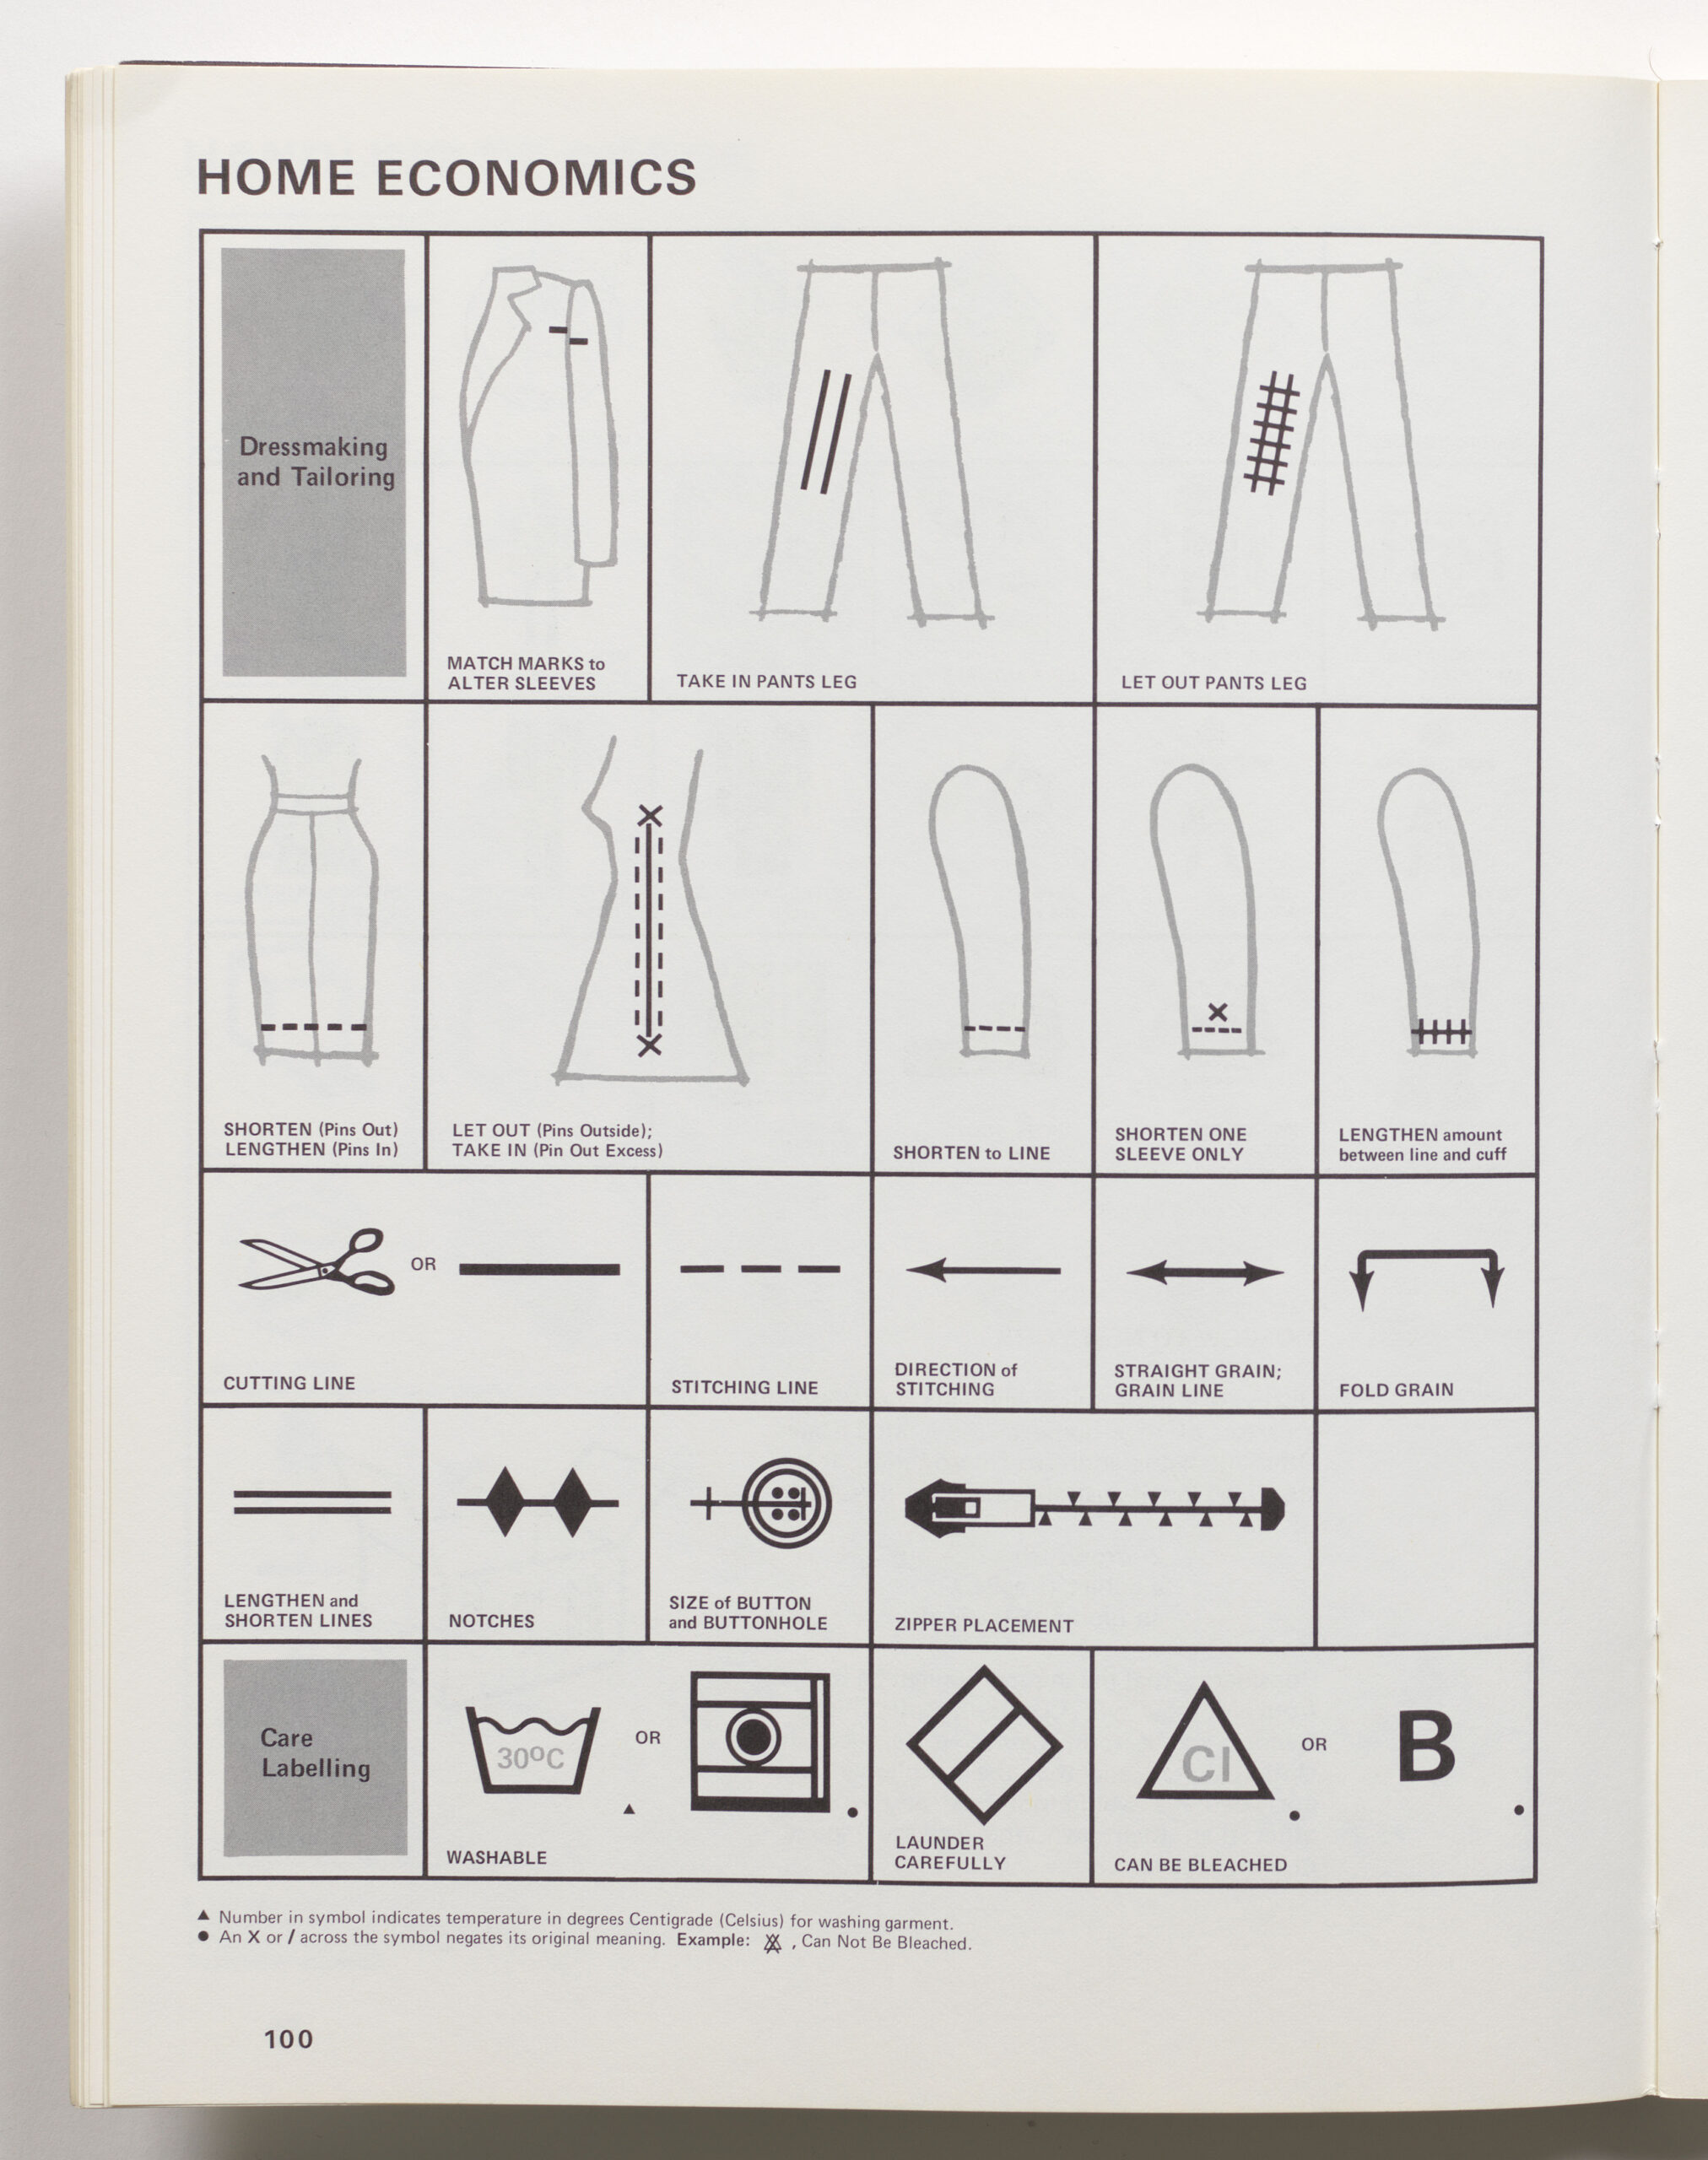 Page from the book the Symbol Sourcebook showing black text and black and grey imagery on a white background; “HOME ECONOMICS” at top left with “Dressmaking and Tailoring” below to indicate three rows of symbols including a pair of pants with two parallel stripes on the left leg with “TAKE IN PANTS LEG” below.